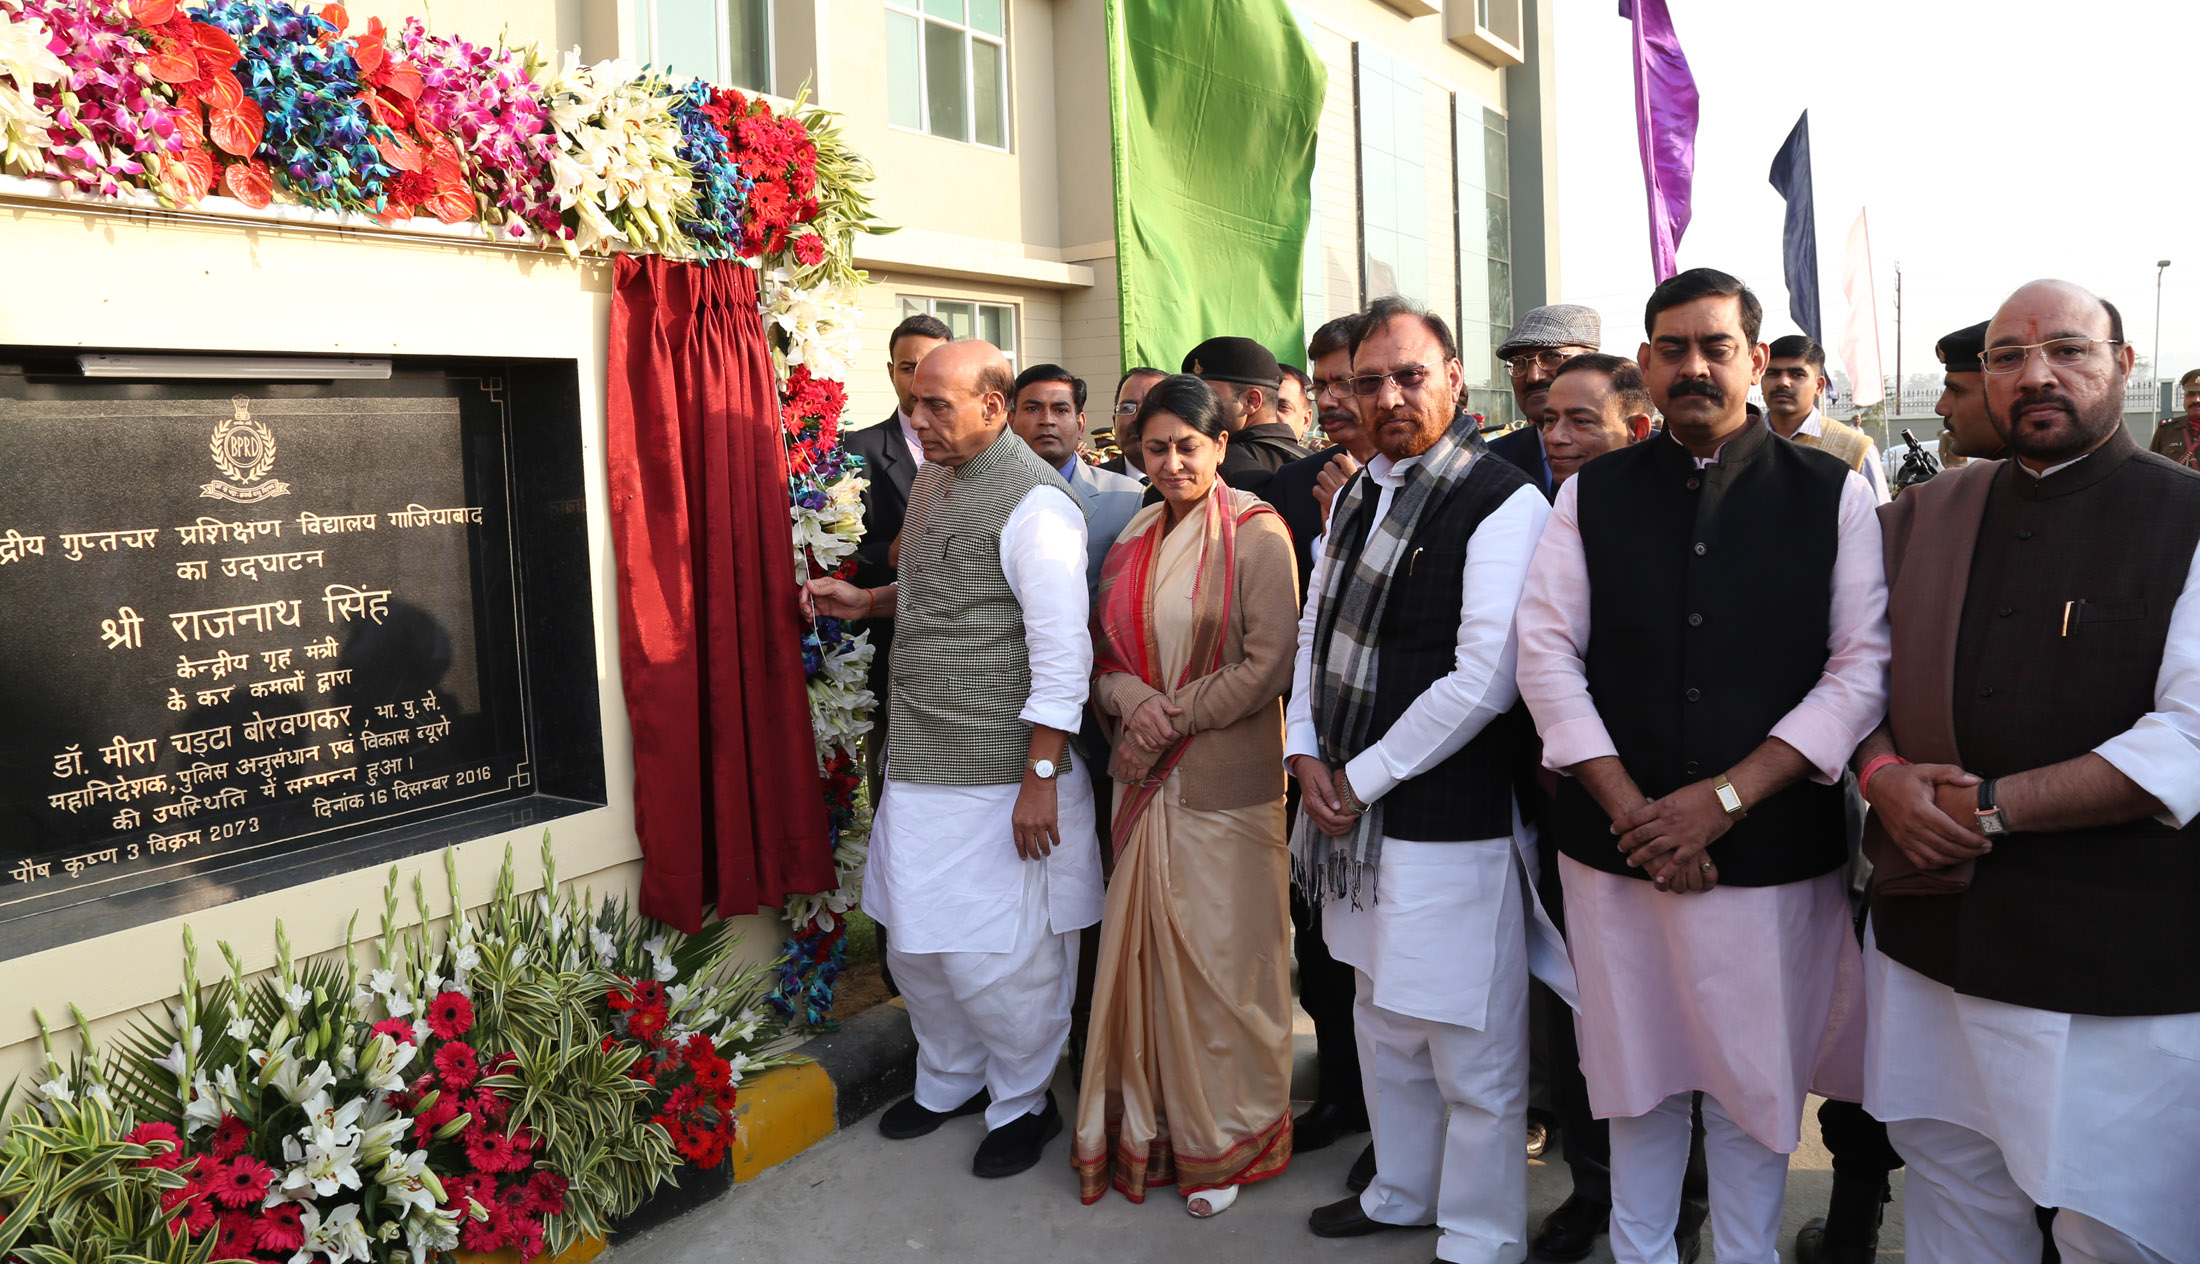 The Union Home Minister, Shri Rajnath Singh inaugurating the new campus of Central Detective Training School (CDTS), in Ghaziabad on December 16, 2016.